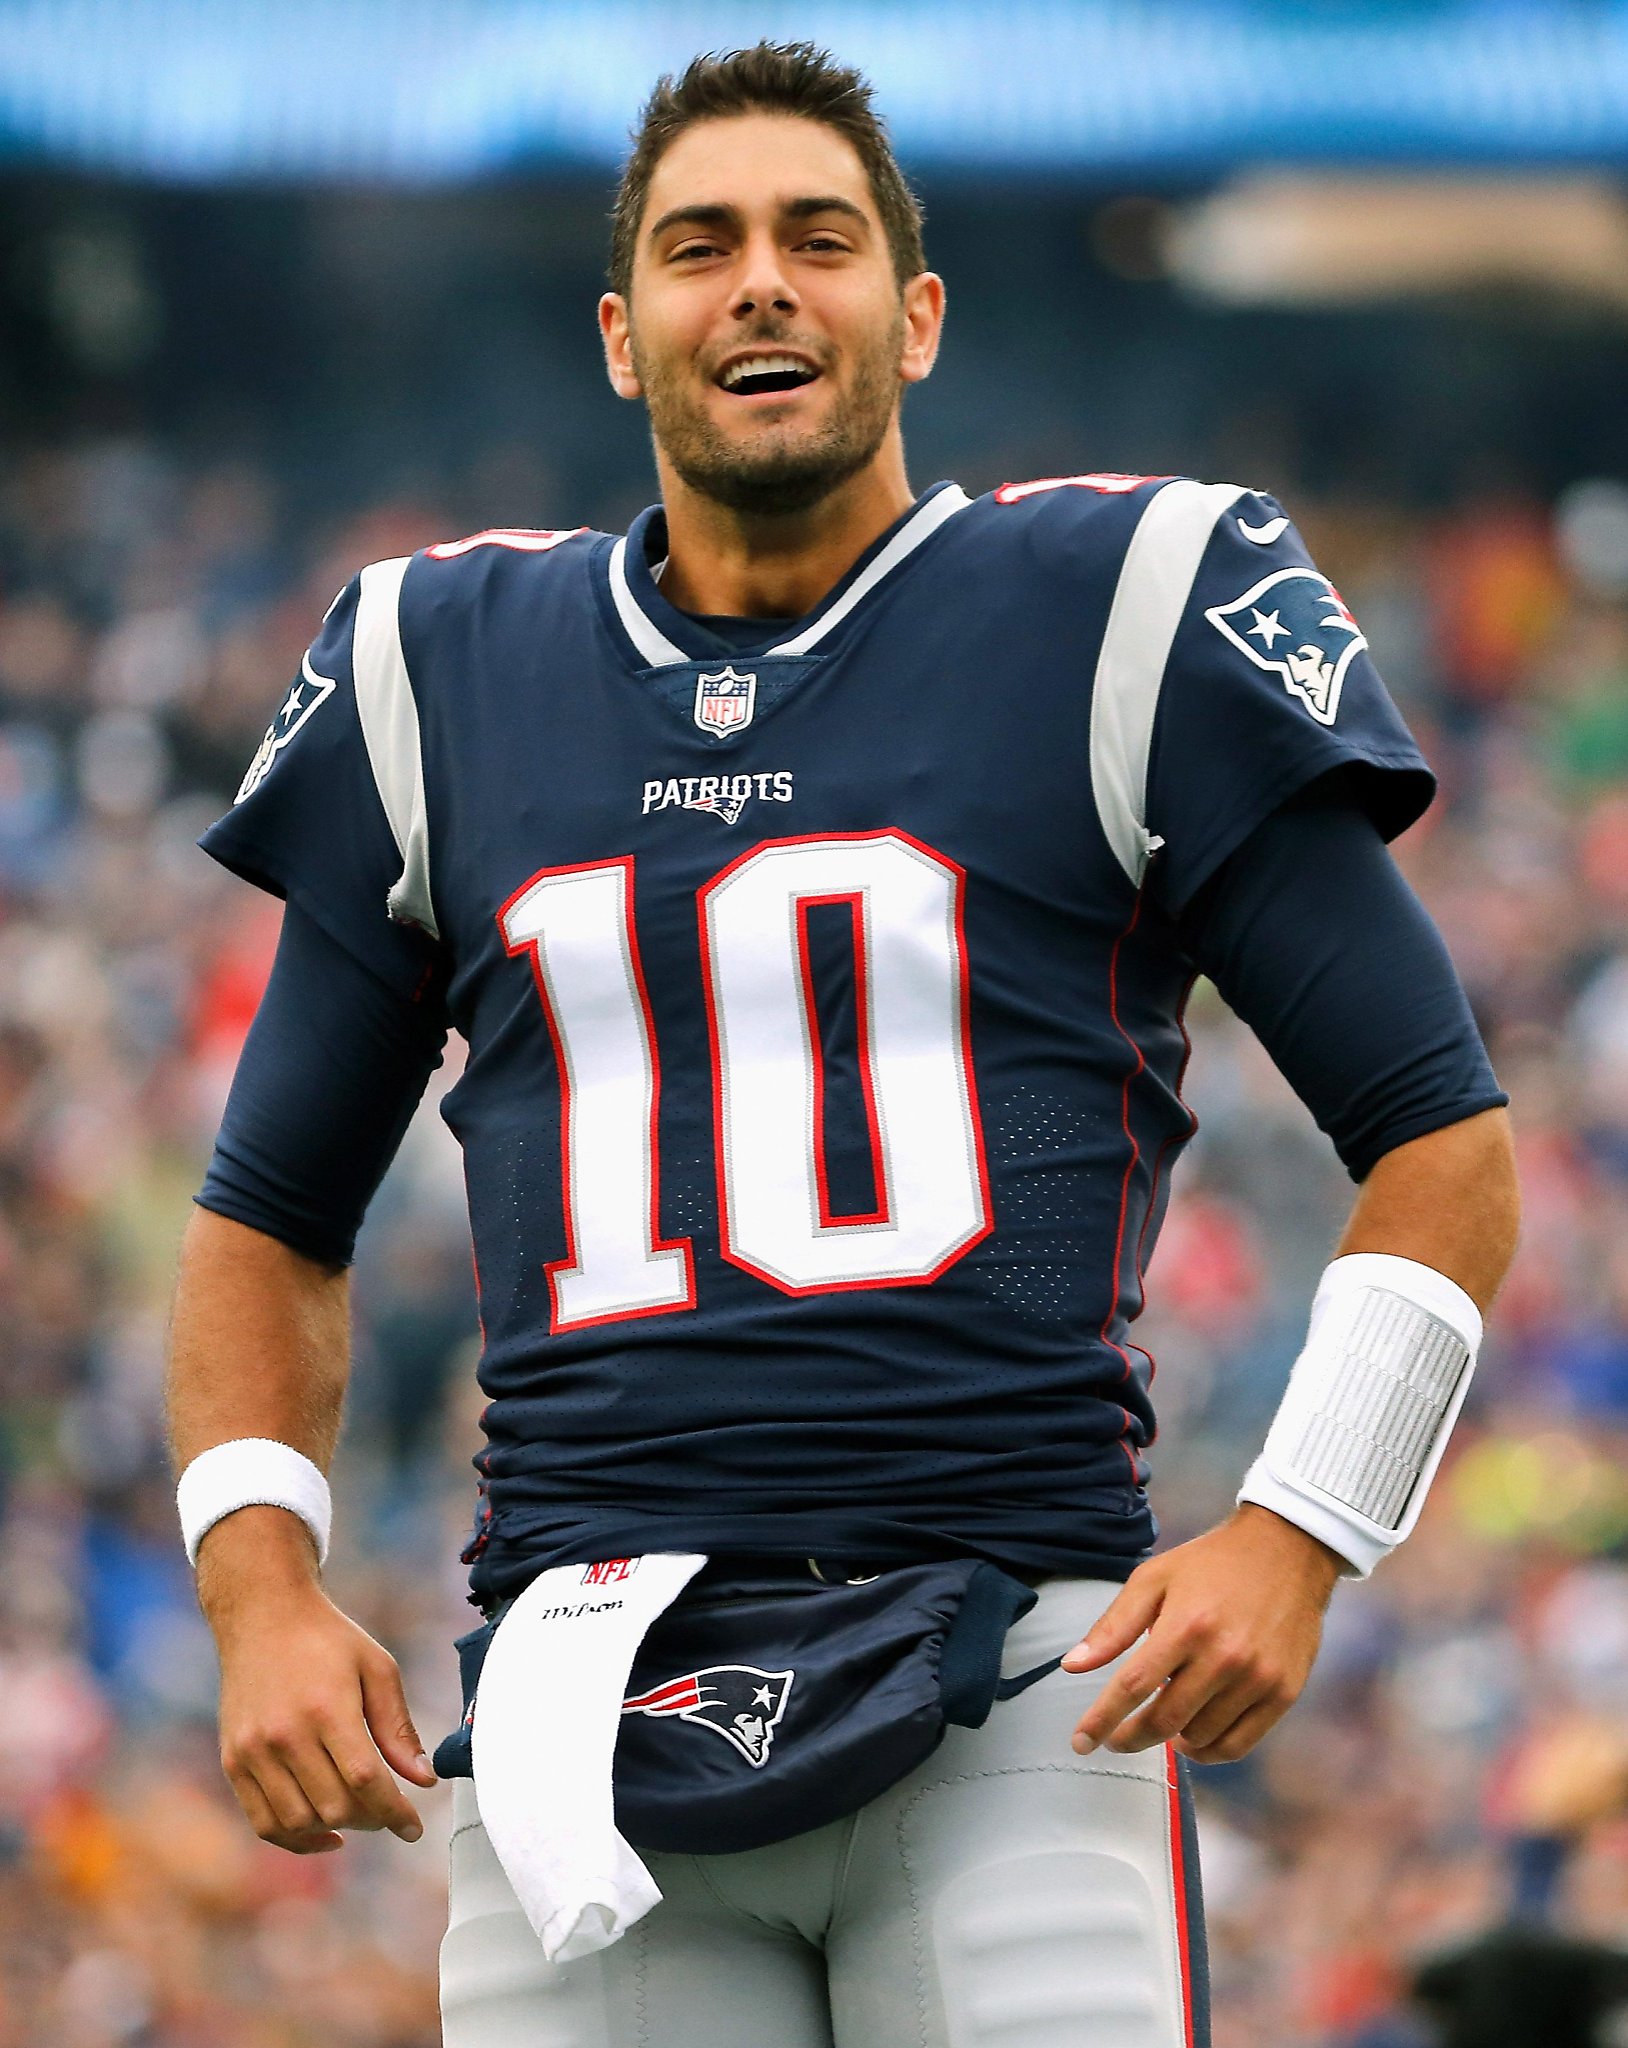 New 49ers quarterback Jimmy Garoppolo quickly takes charge SFGate